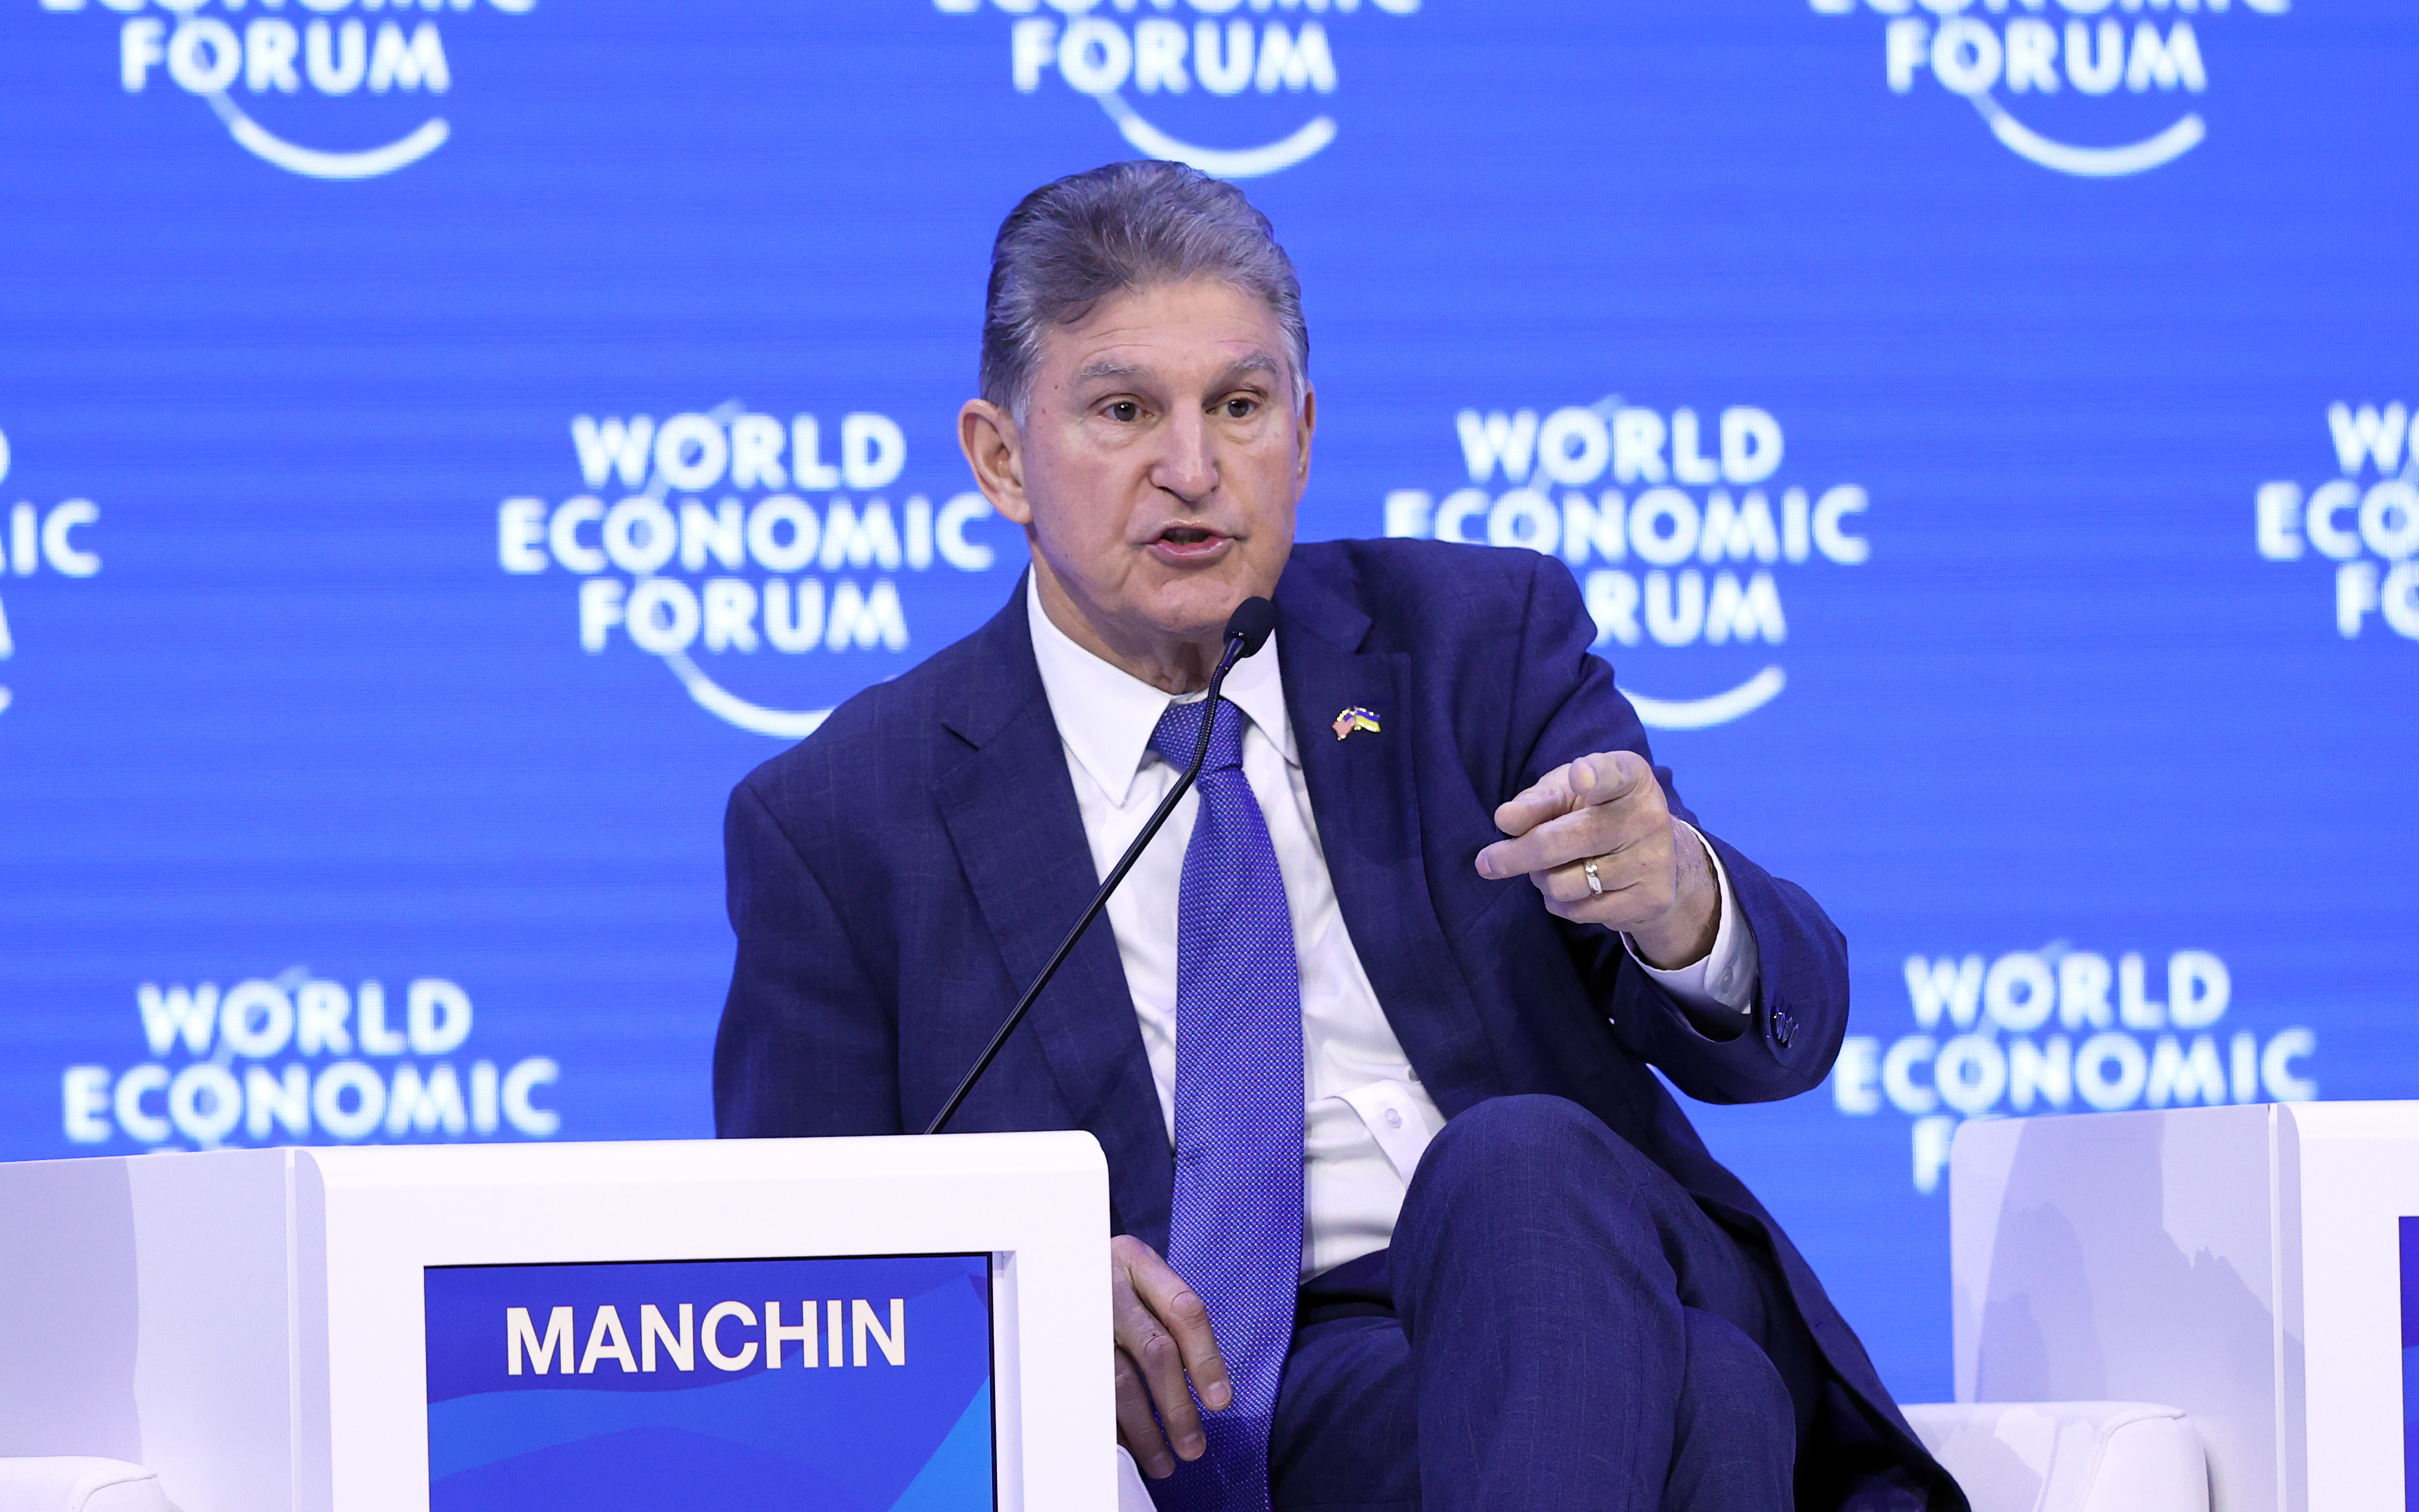 U.S. Senator Joe Manchin attends a special session within the World Economic Forum (WEF) in Davos, Switzerland on January 19, 2023. (Photo by Dursun Aydemir/Anadolu Agency via Getty Images)